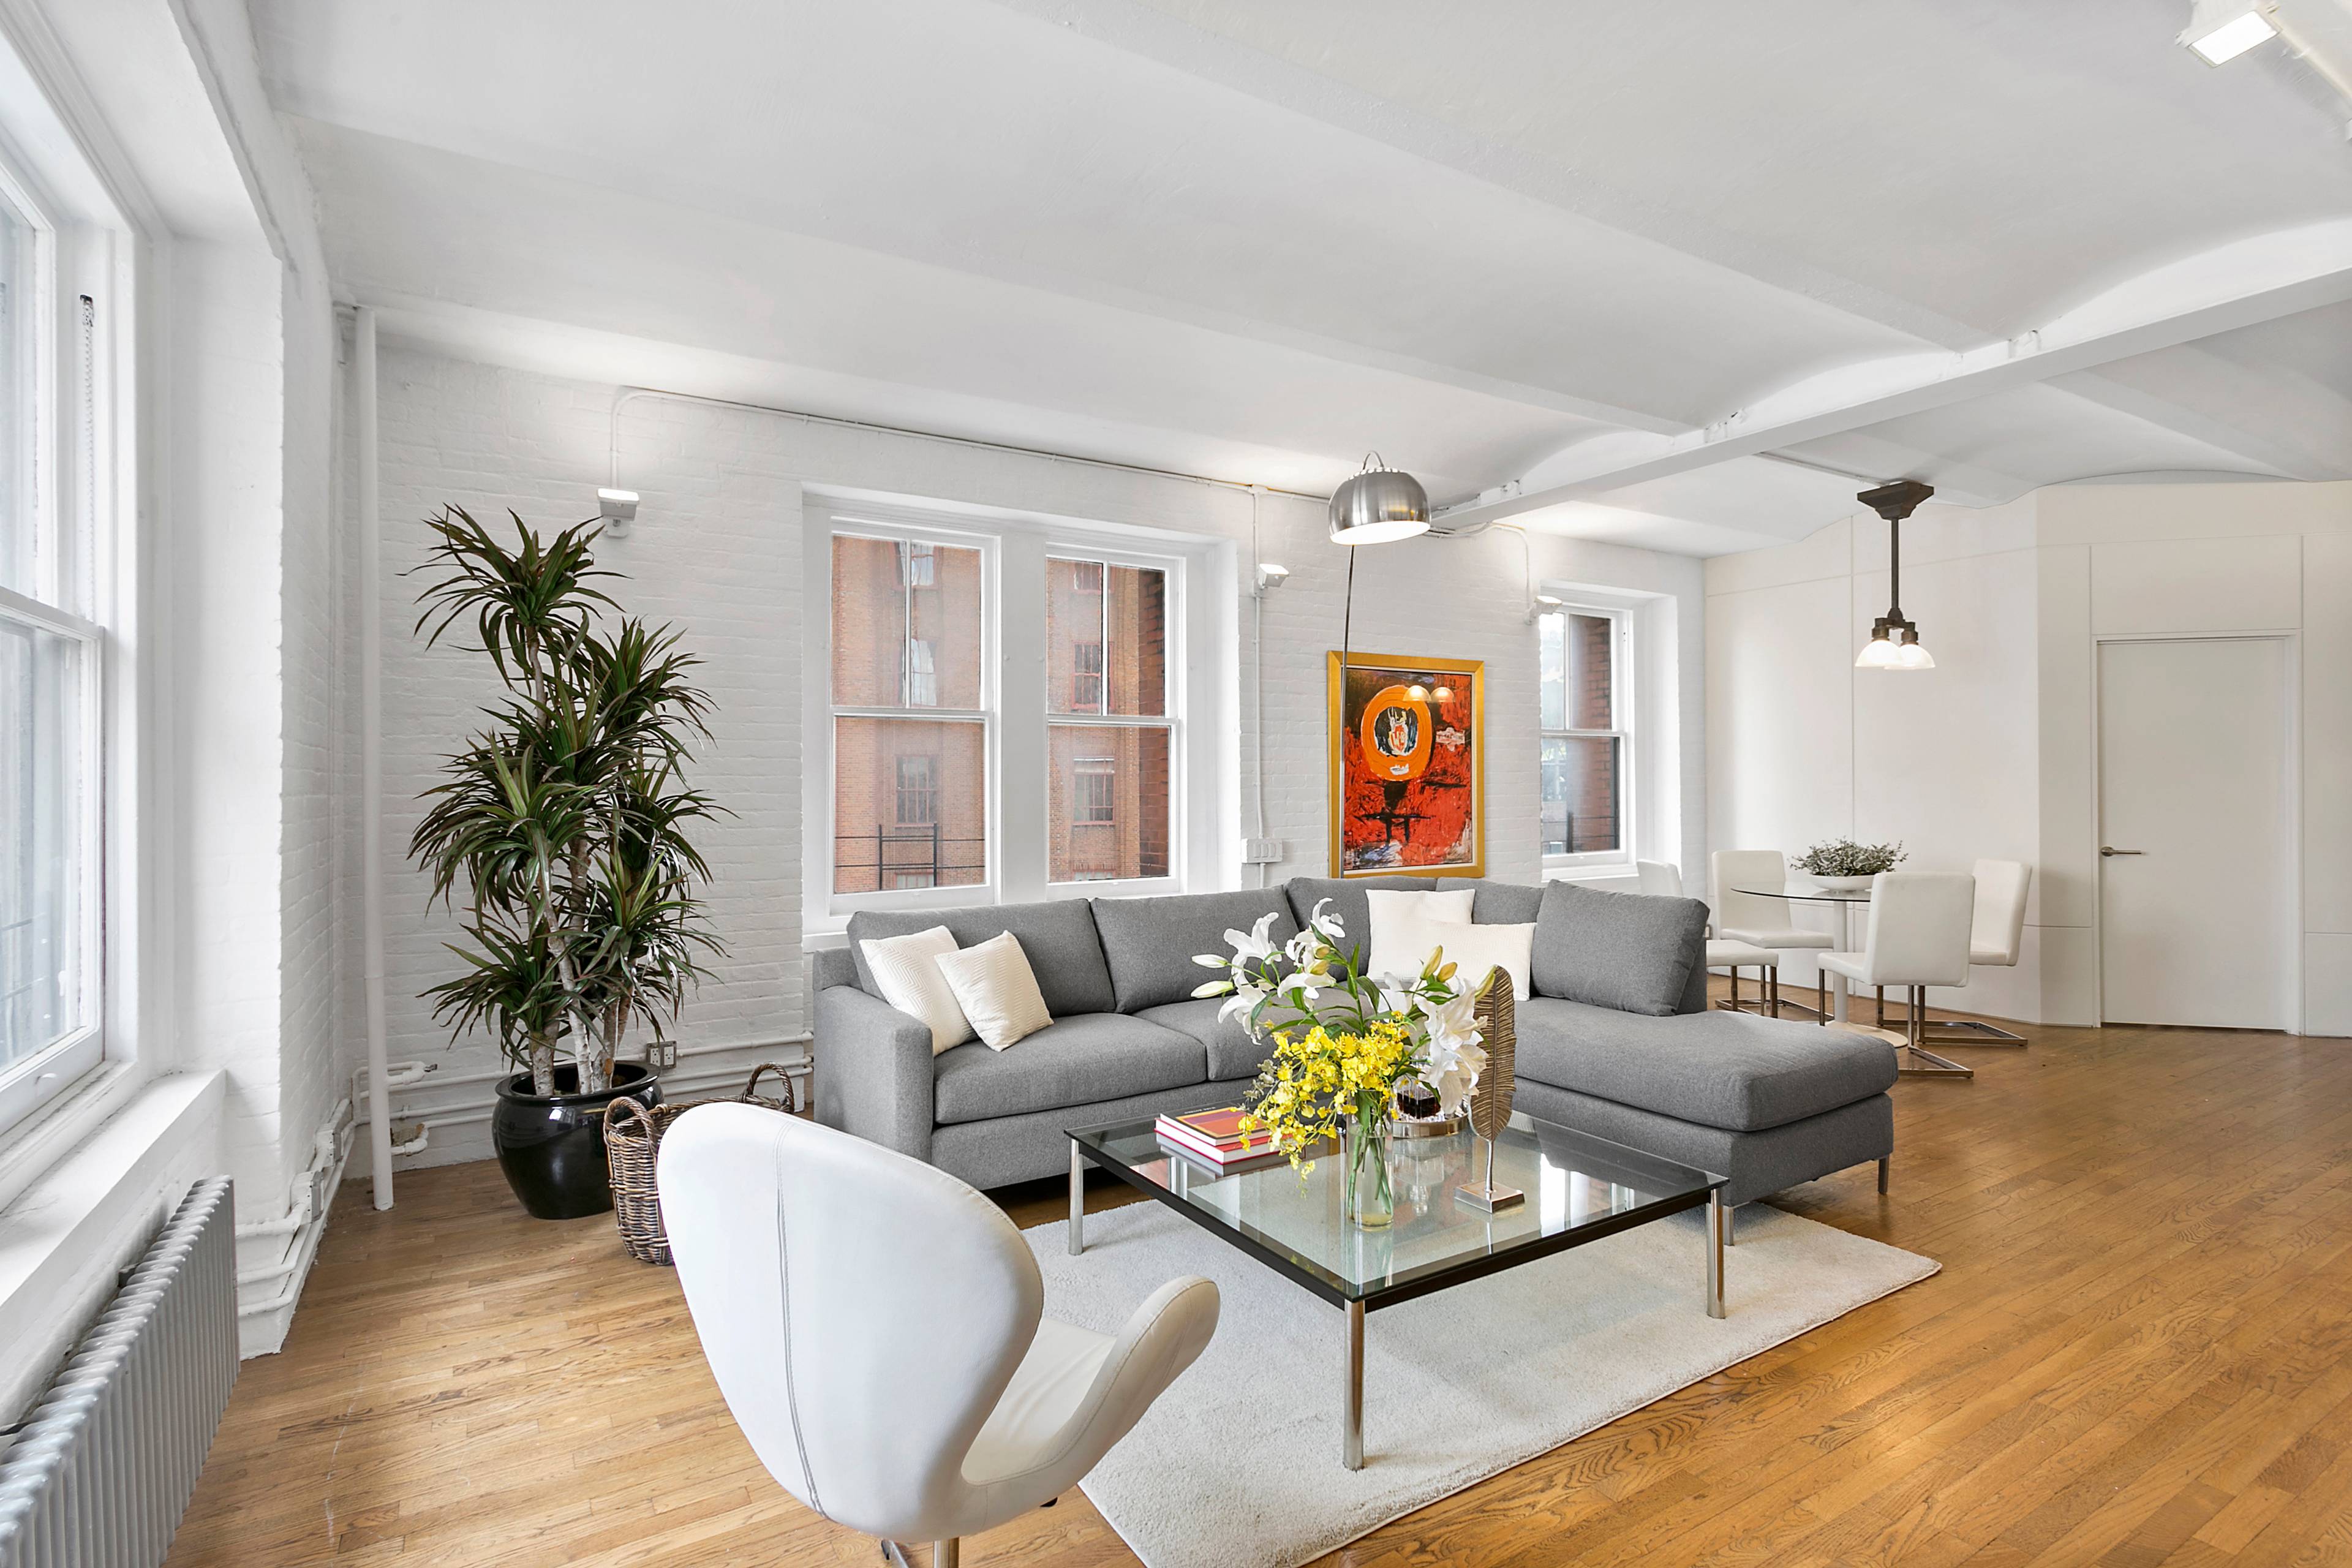 Welcome home to this rarely available, highly coveted 3 bedroom corner loft residence in the heart of TriBeCa.